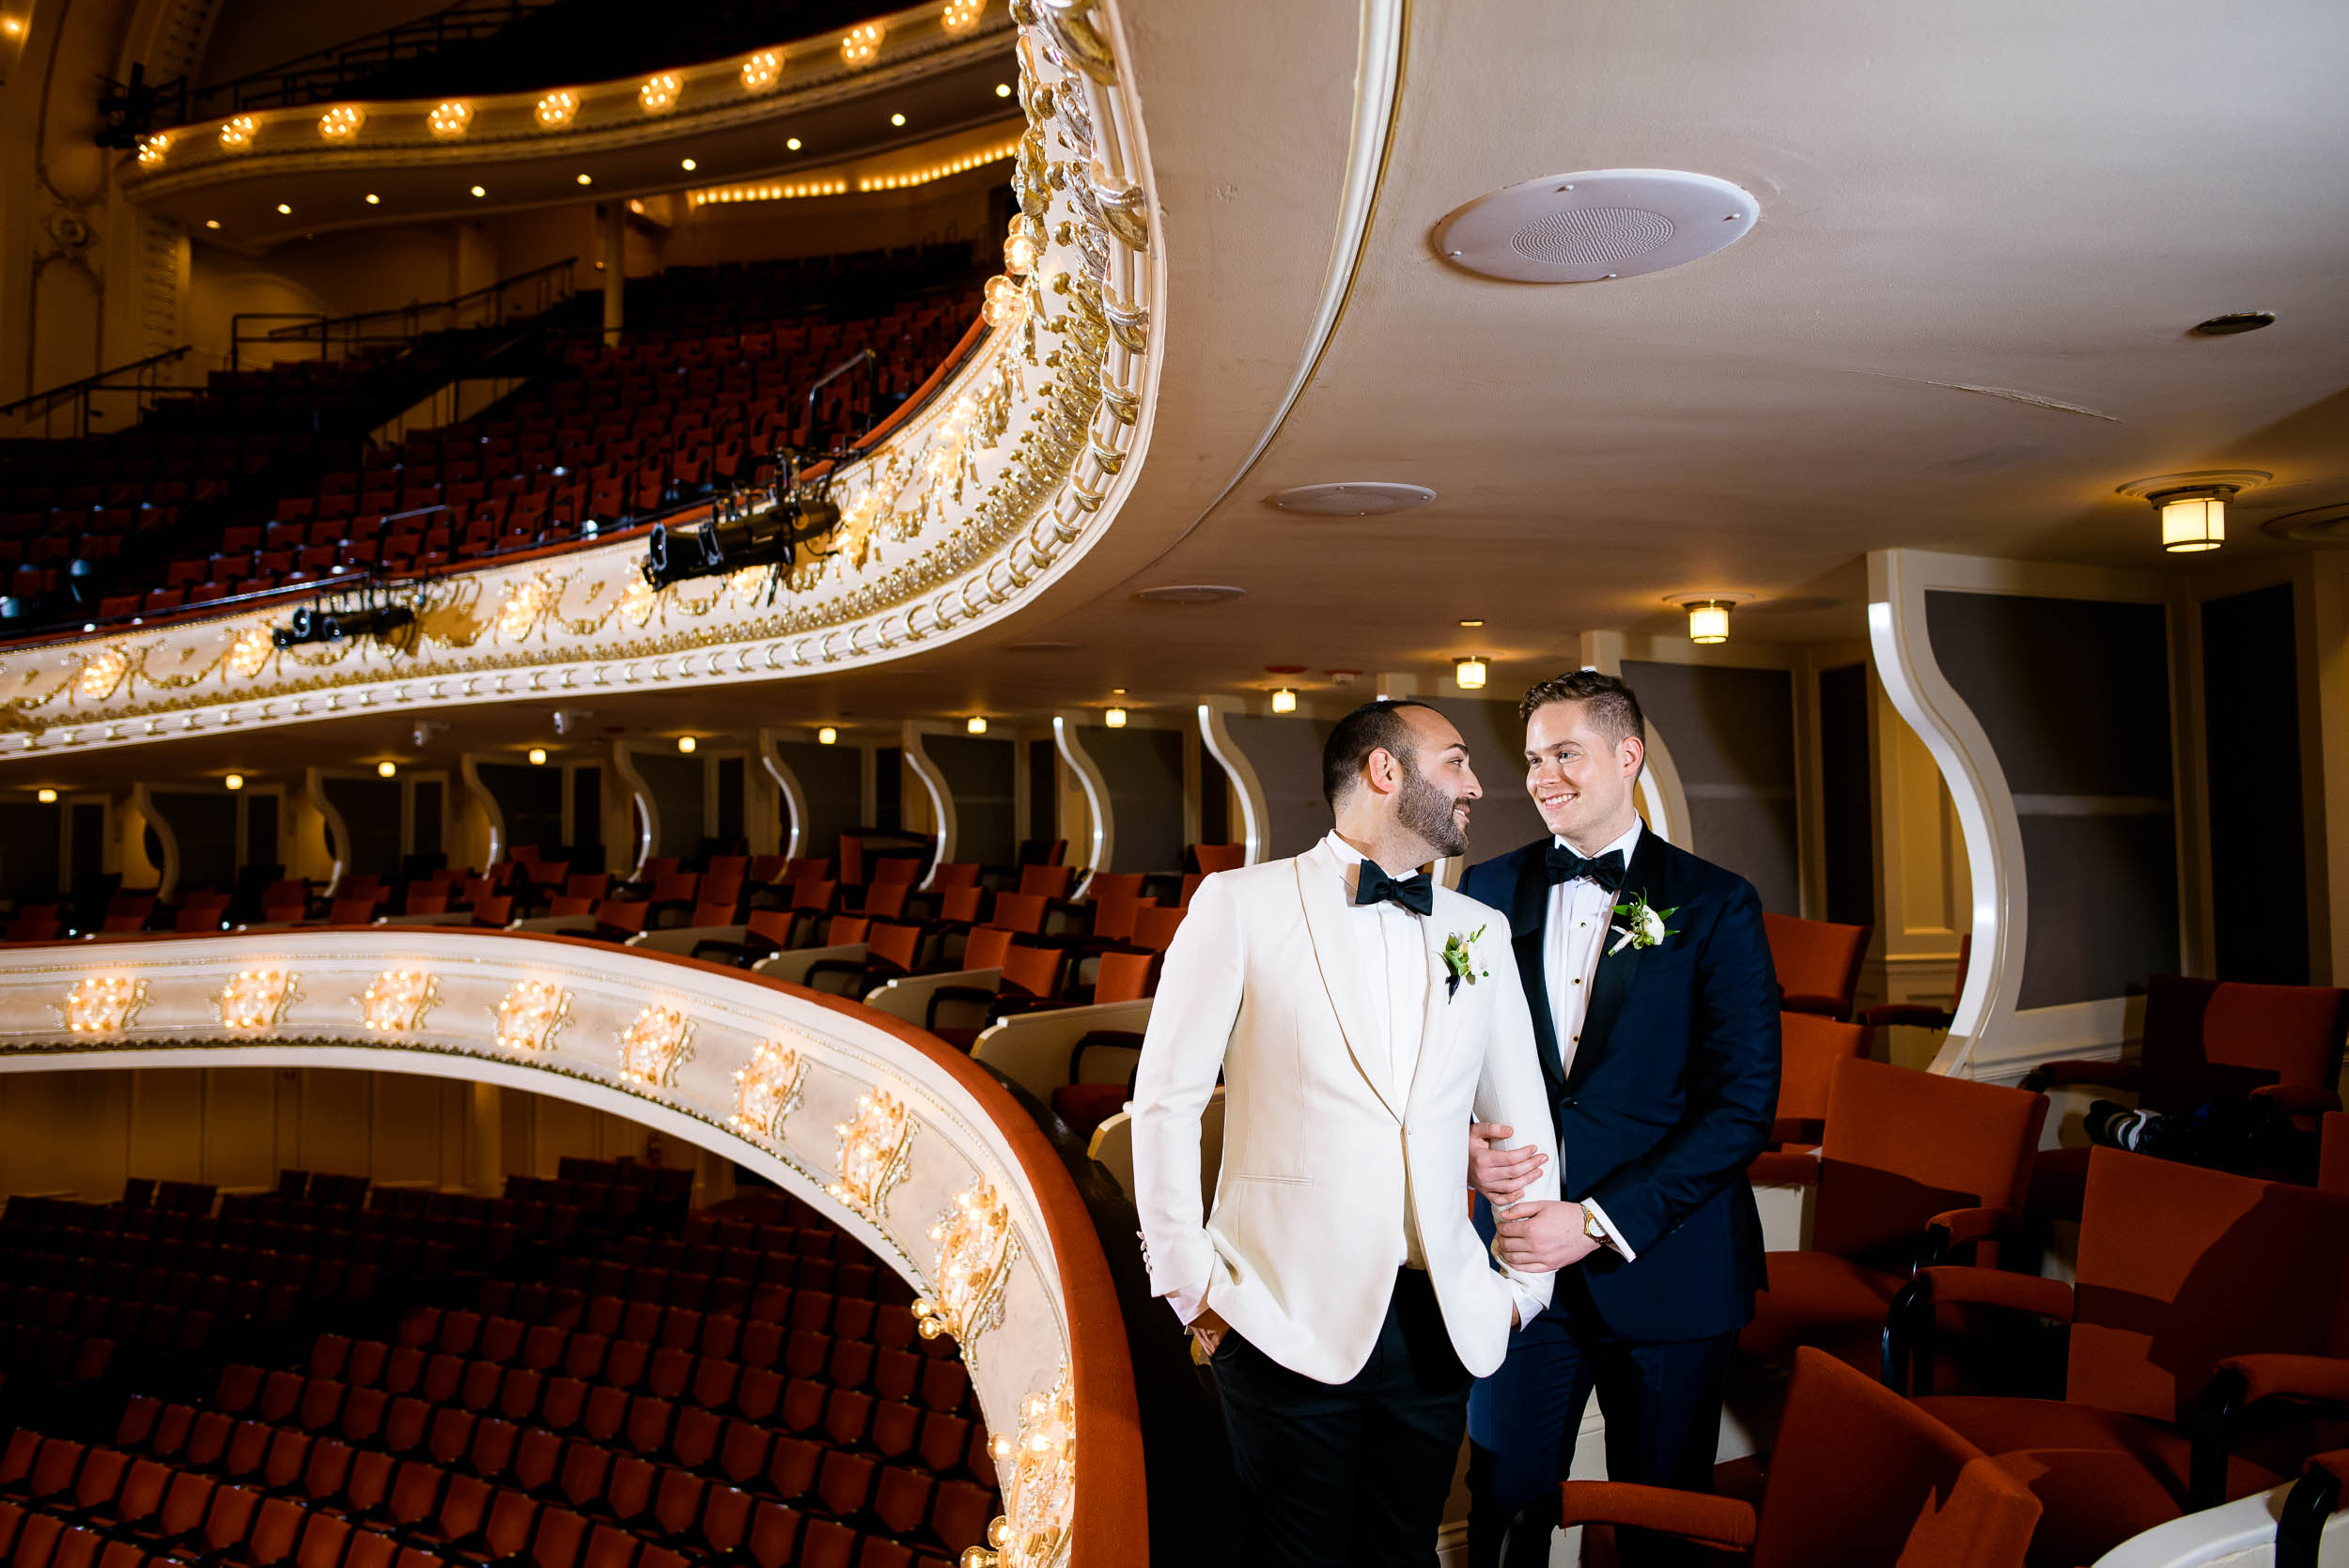 Grooms posing inside wedding venue for luxurious fall wedding at the Chicago Symphony Center captured by J. Brown Photography. See more wedding ideas at jbrownphotography.com!